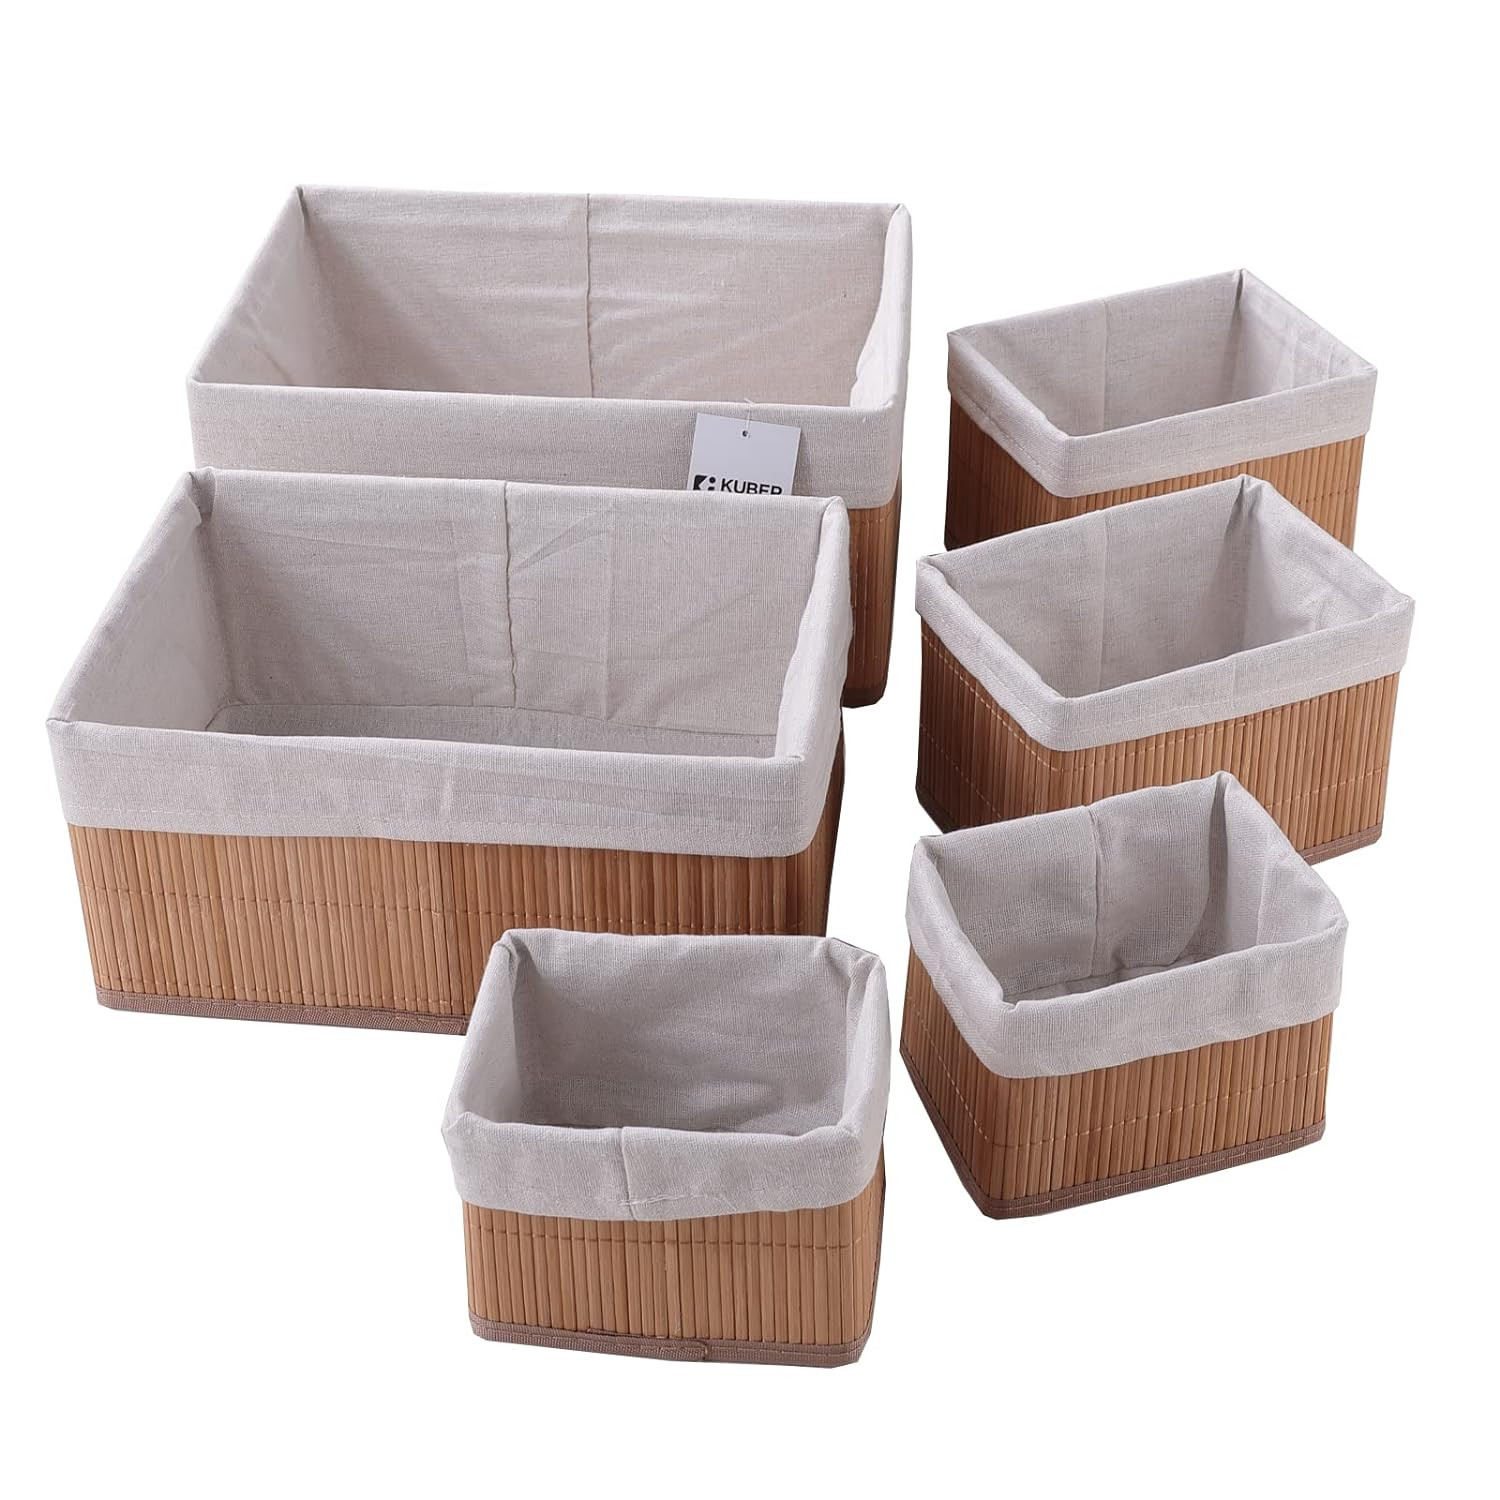 Kuber Industries Pack of 6 Bamboo Storage Basket With Liner|Fodable Storage Organizer|Box For Cloth, Toiletry, Bathroom|Capacity 14.9L, 10.5L, 3.5L, 1.9L|Natural|